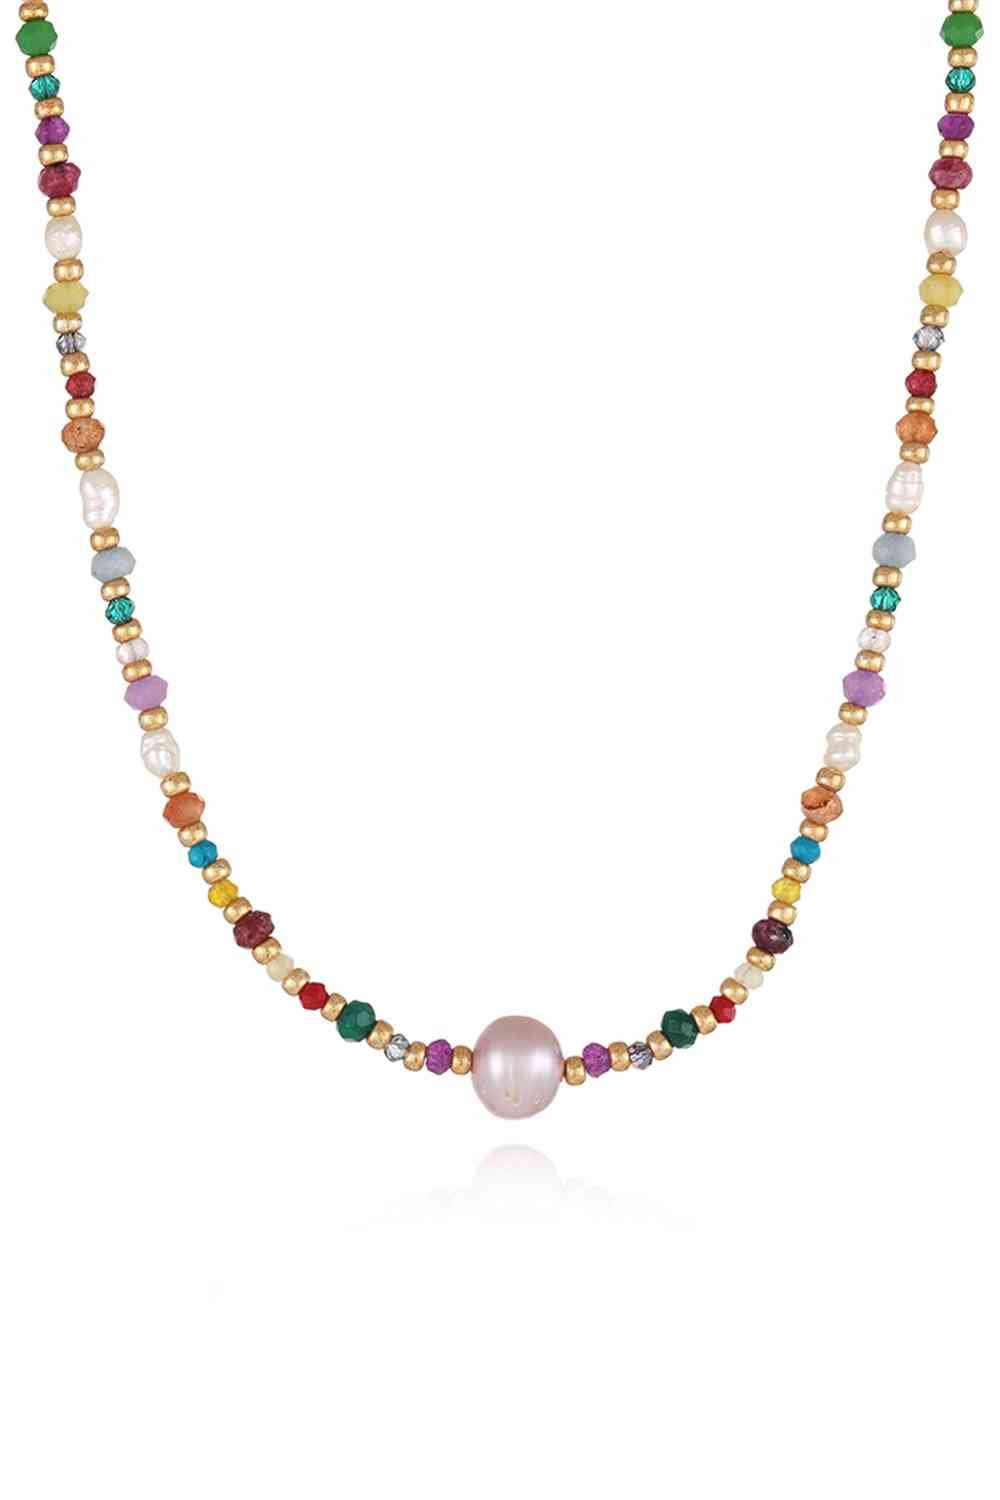 Multicolored Bead Necklace - GemThreads Boutique